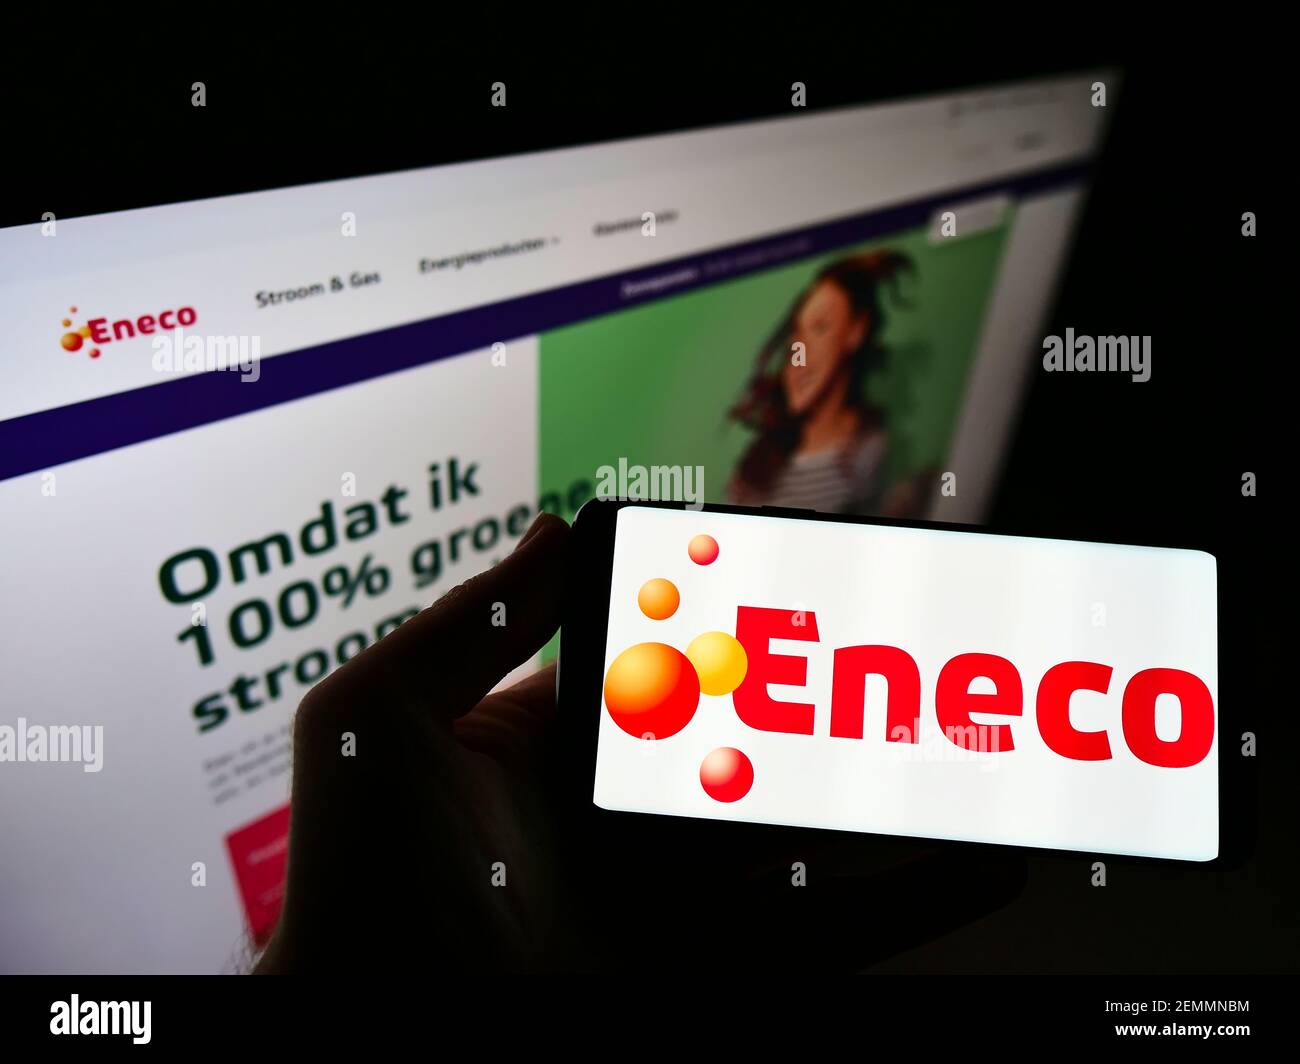 Person holding smartphone with logo of Dutch utility company Eneco Groep N.V. on screen in front of website. Focus on phone display. Unmodified photo. Stock Photo